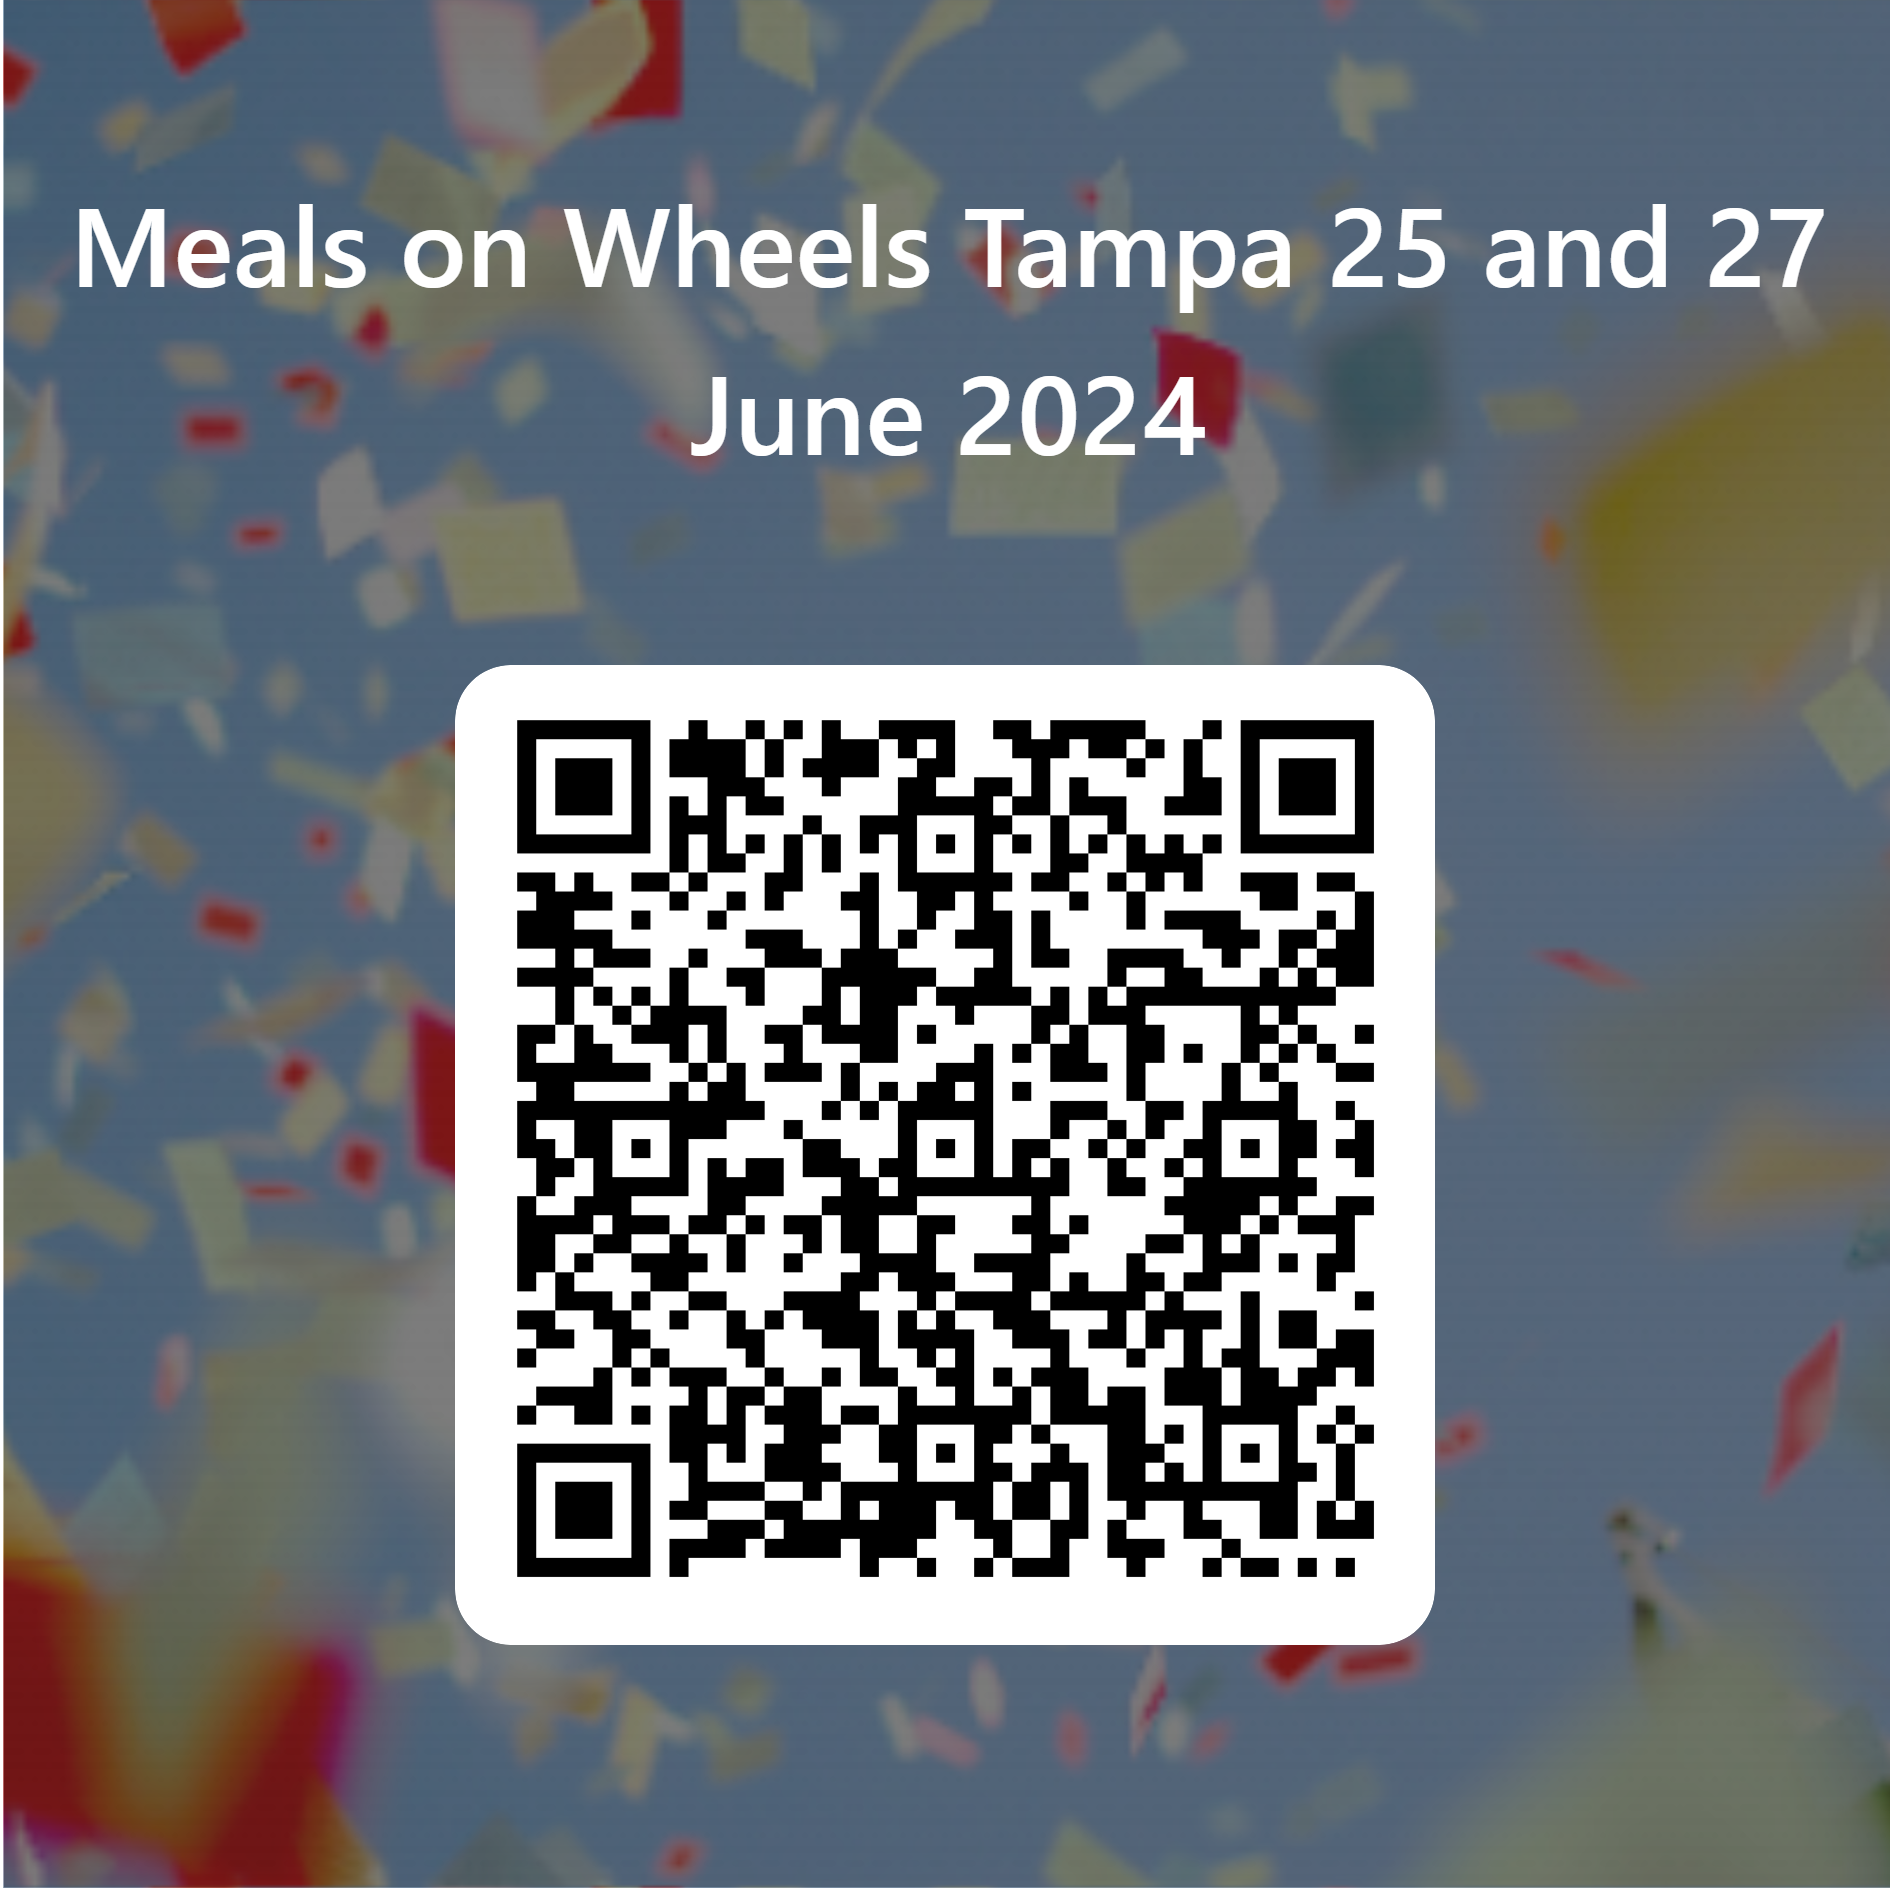 QRCode-for-Meals-on-Wheels-Tampa_25-and-27-June-2024-.png